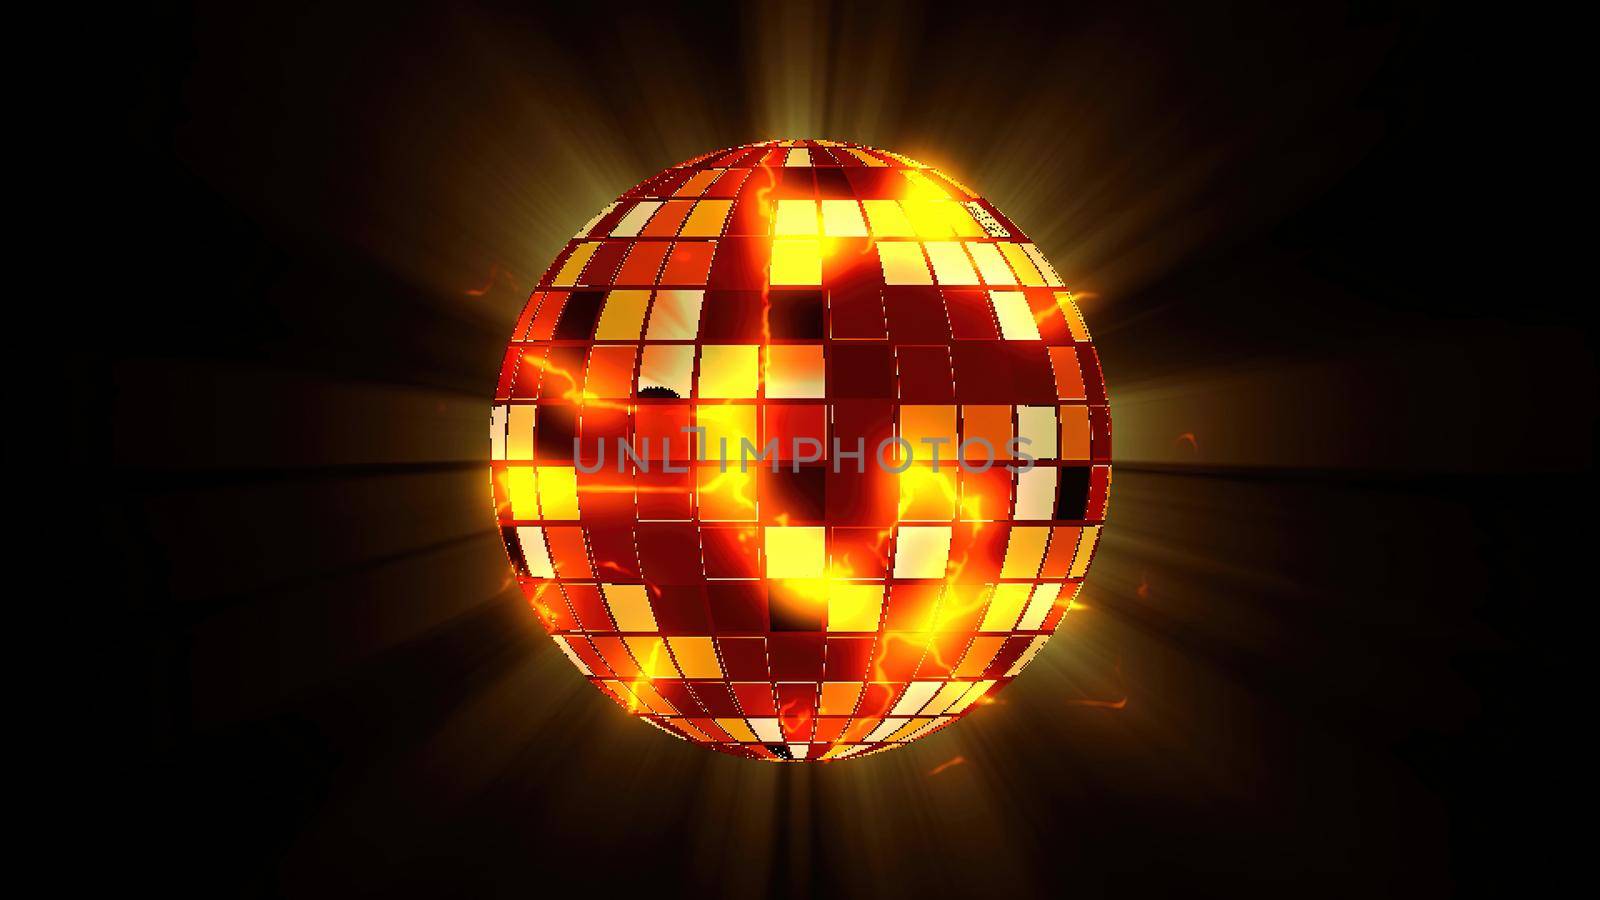 Fire ball globe with electric and sun ray background. Celebration, dj, karaoke concept